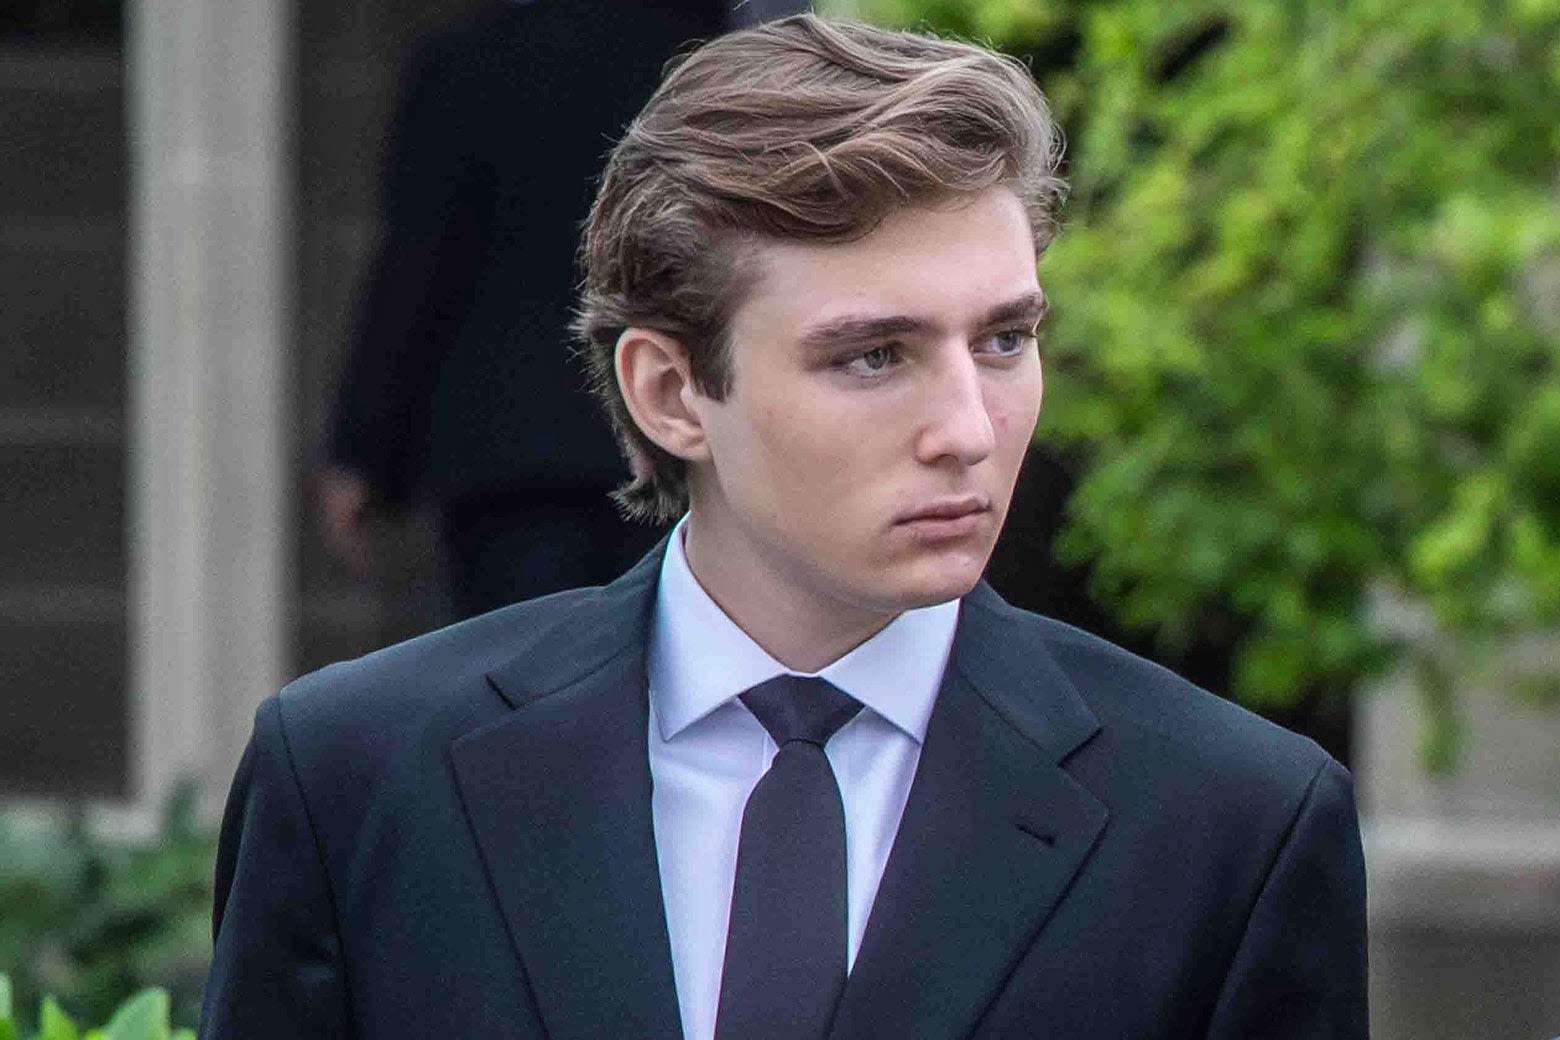 Freshly 18, Barron Trump Already Has a Huge Hive of Fans. They’re Even Weirder Than You’d Think.